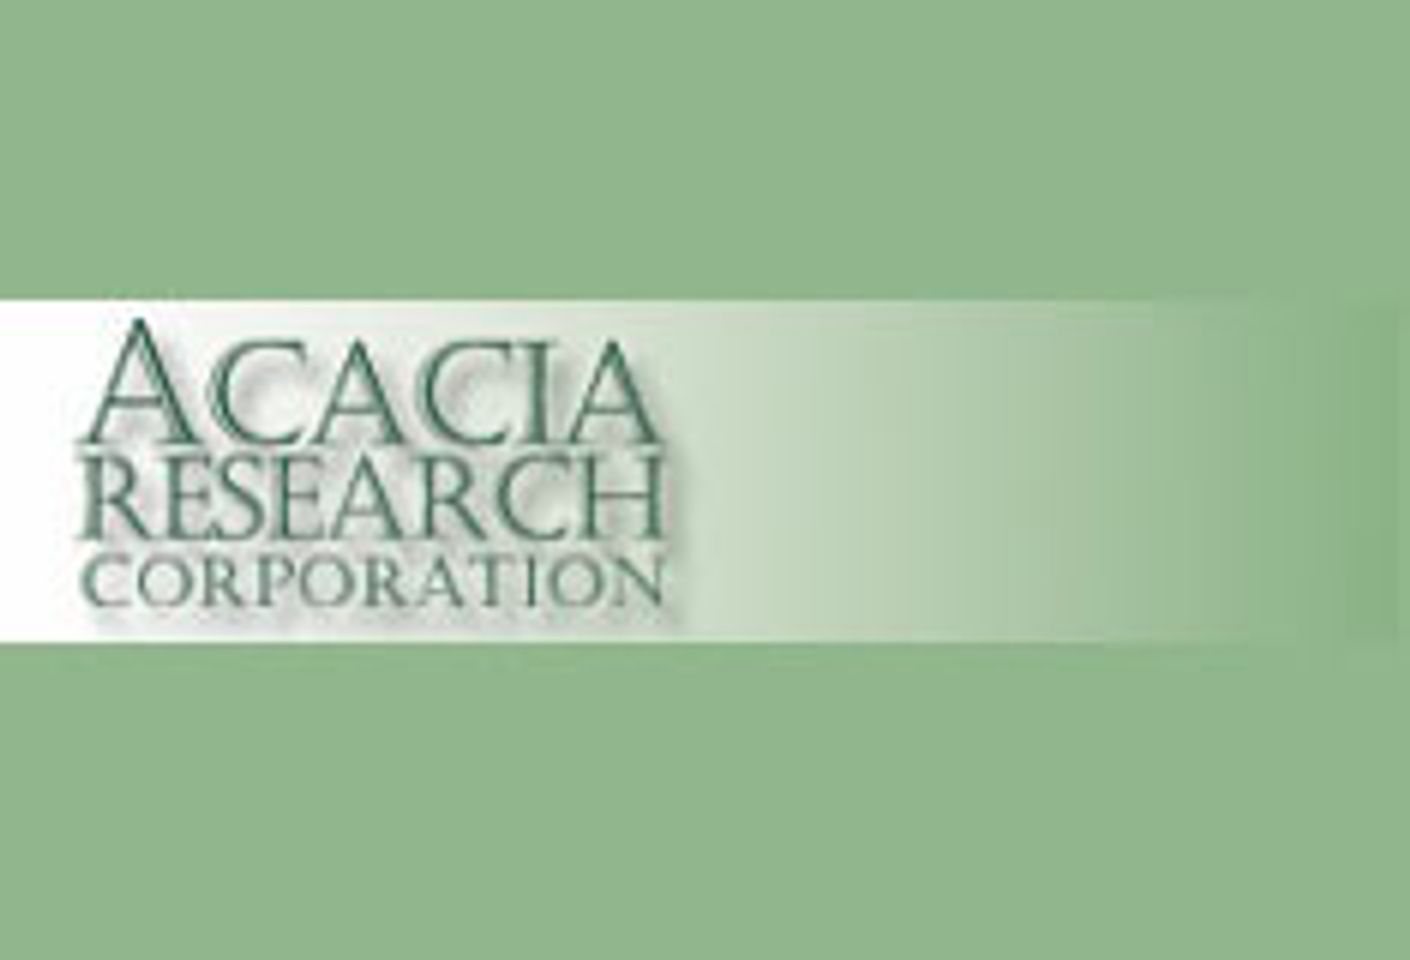 Acacia Formalizes Class Action Bid Against Adult Net